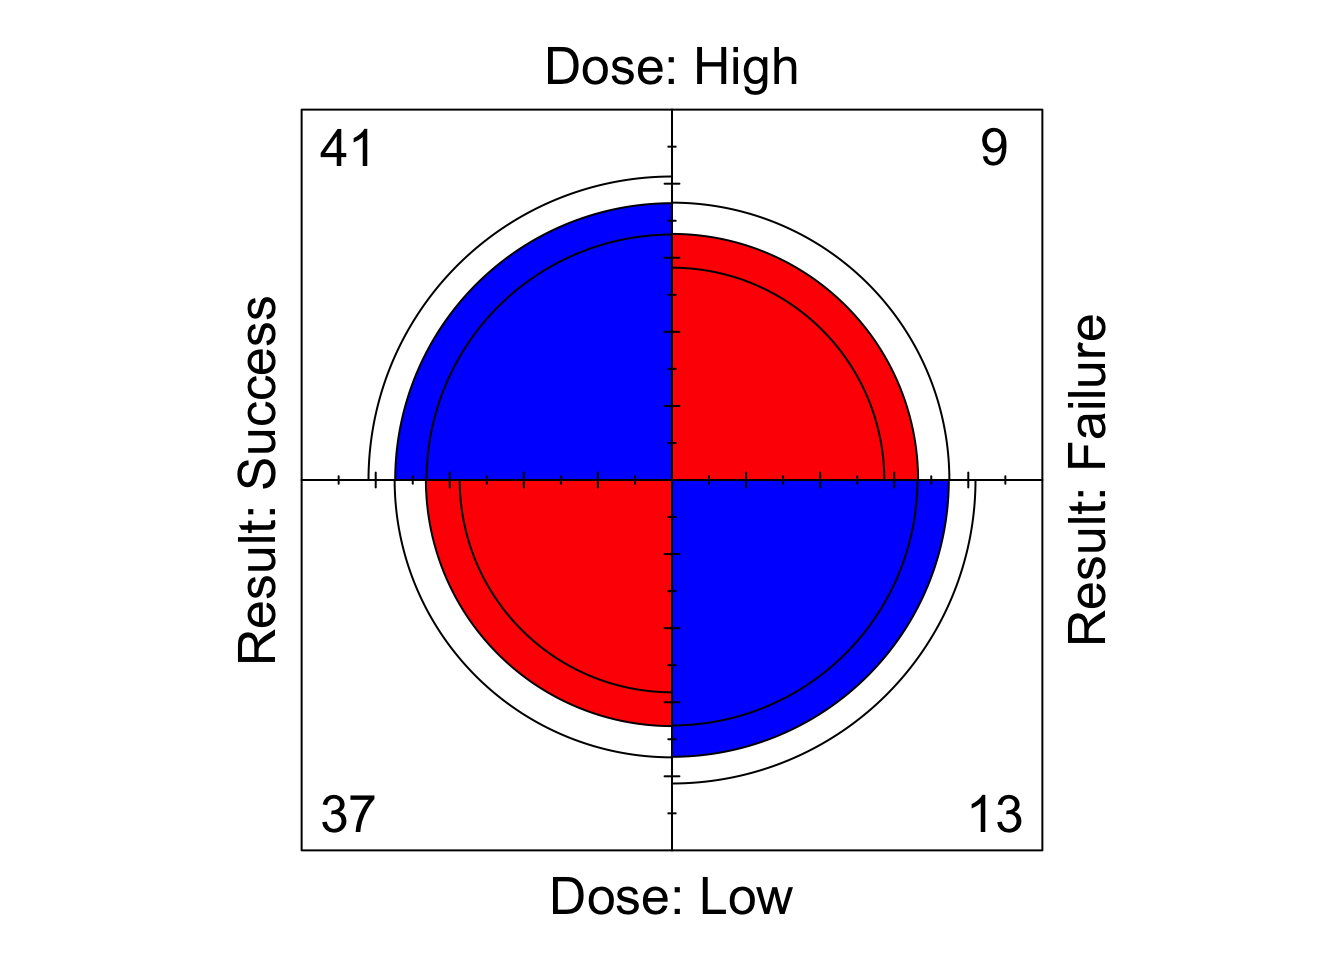 Fourfoldplot of the Dose-Result contingency table data.